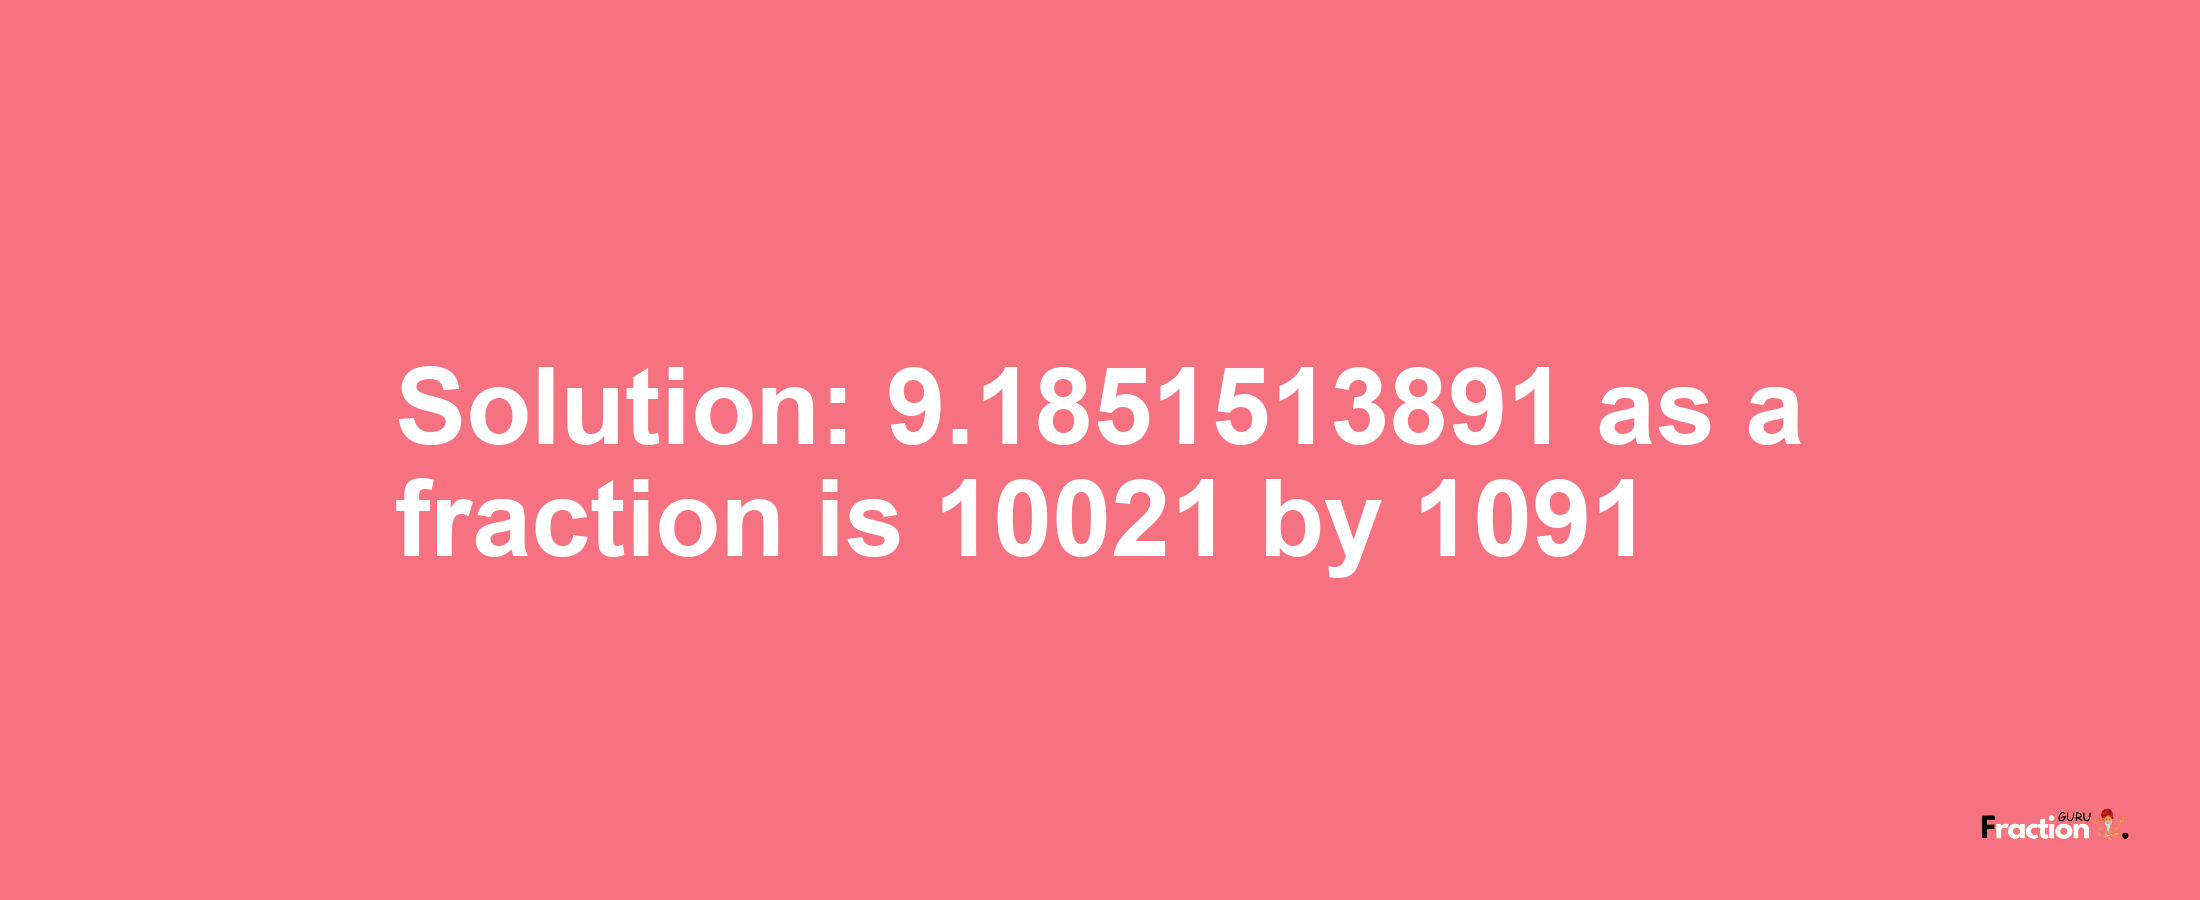 Solution:9.1851513891 as a fraction is 10021/1091